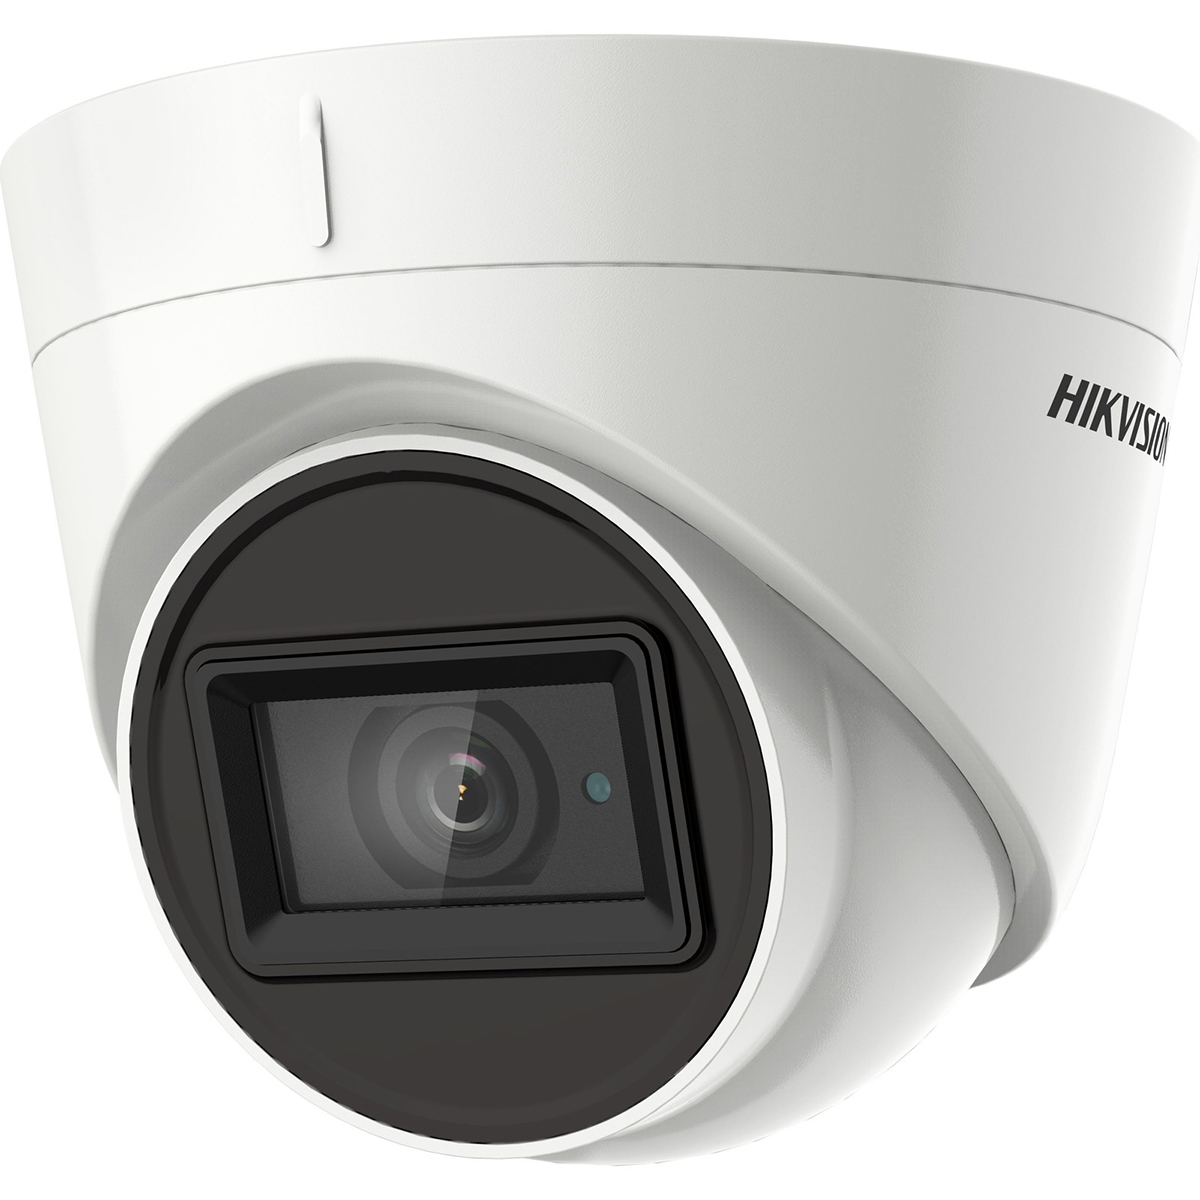 You Recently Viewed Hikvision DS-2CE78U1T-IT3F 8MP External Turret Image